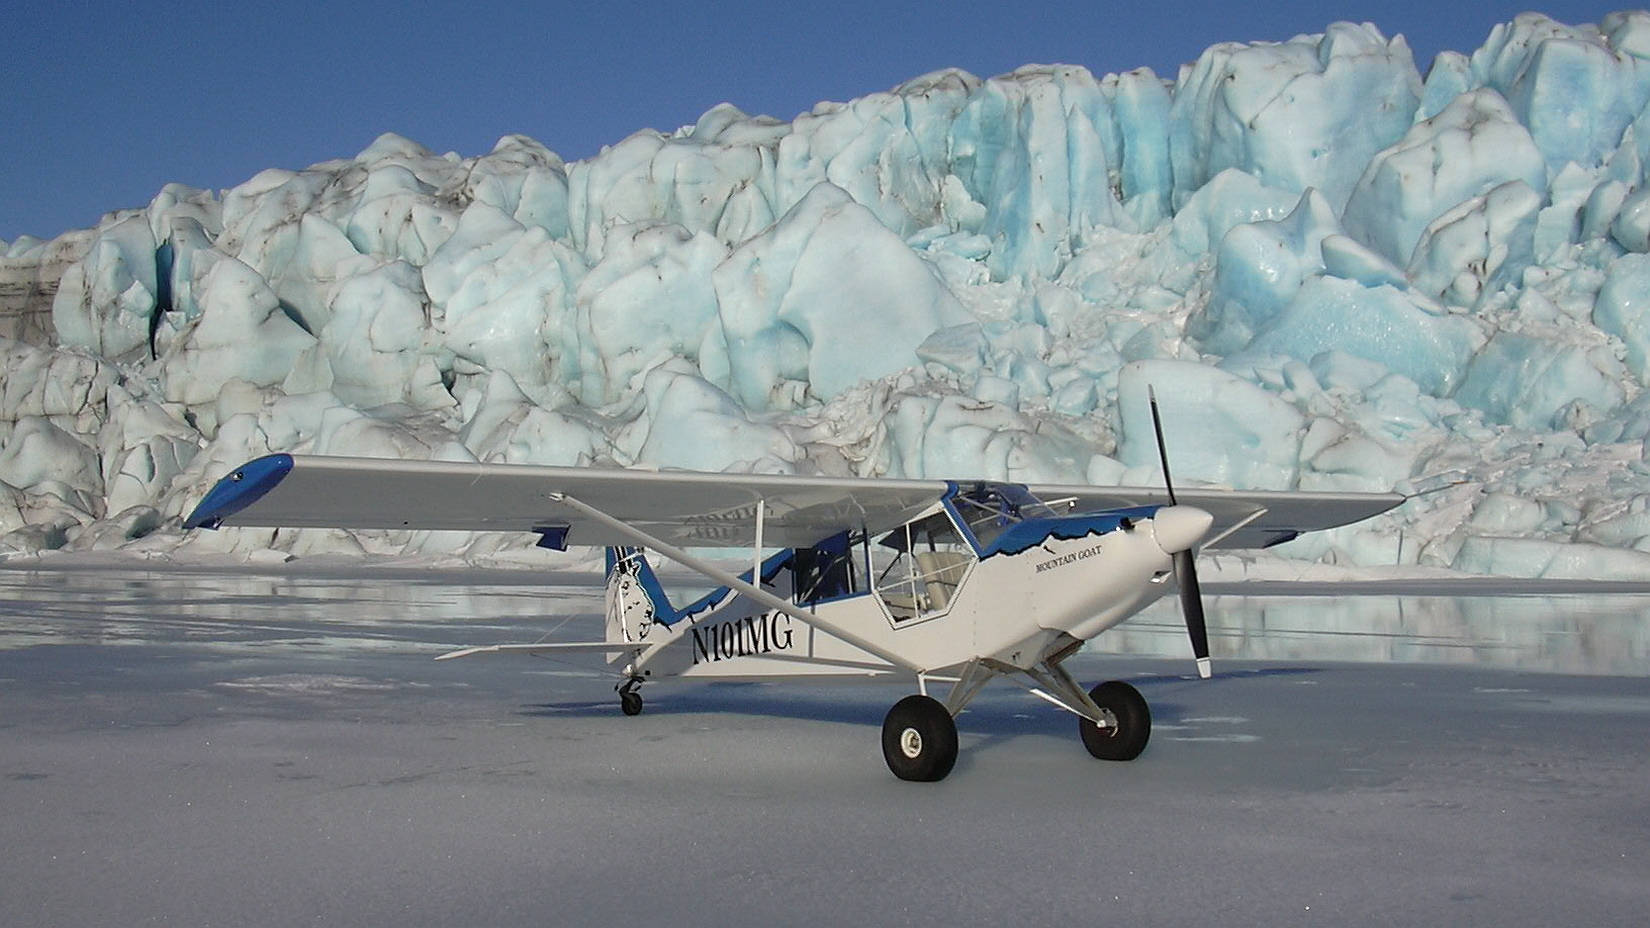 Small White Hd Plane In Ice